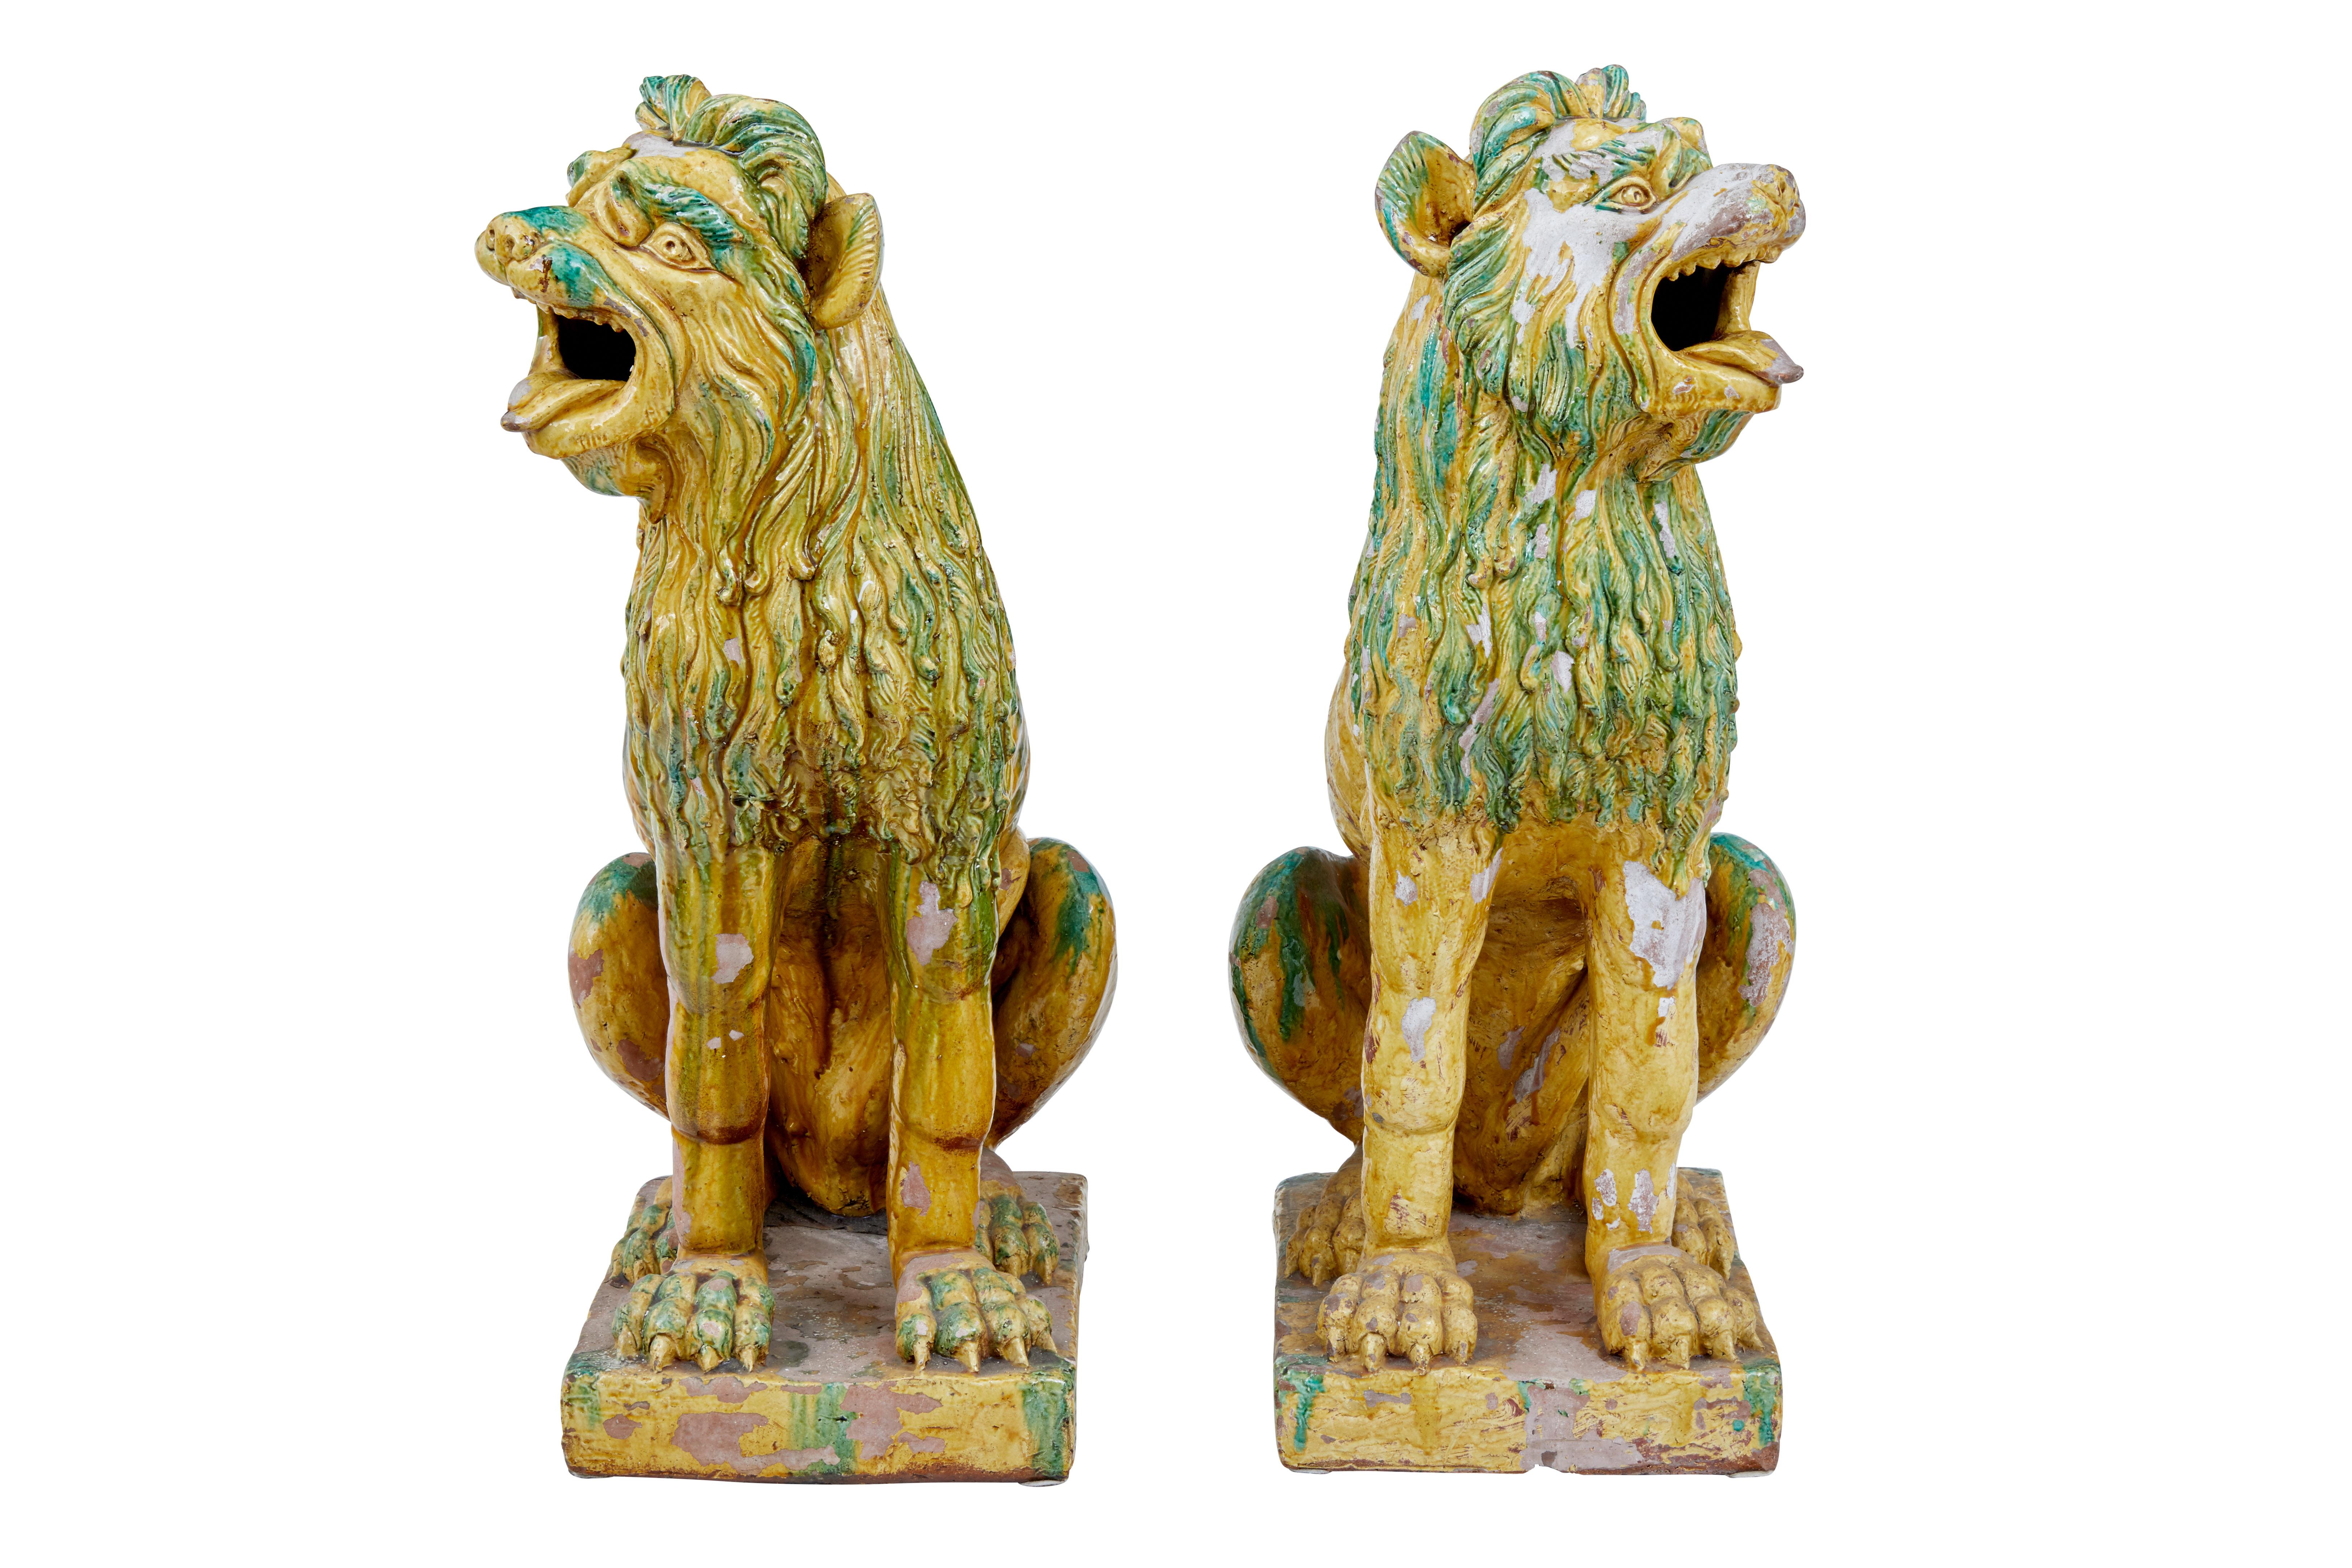 Large pair of mid-20th century Indonesian salt glazed decoration dogs, circa 1950.

Rare pair of 20th century salt glaze dog statues.

We are putting these down as 1950 but they could be earlier.

Glazed with greens, yellows and reds. These